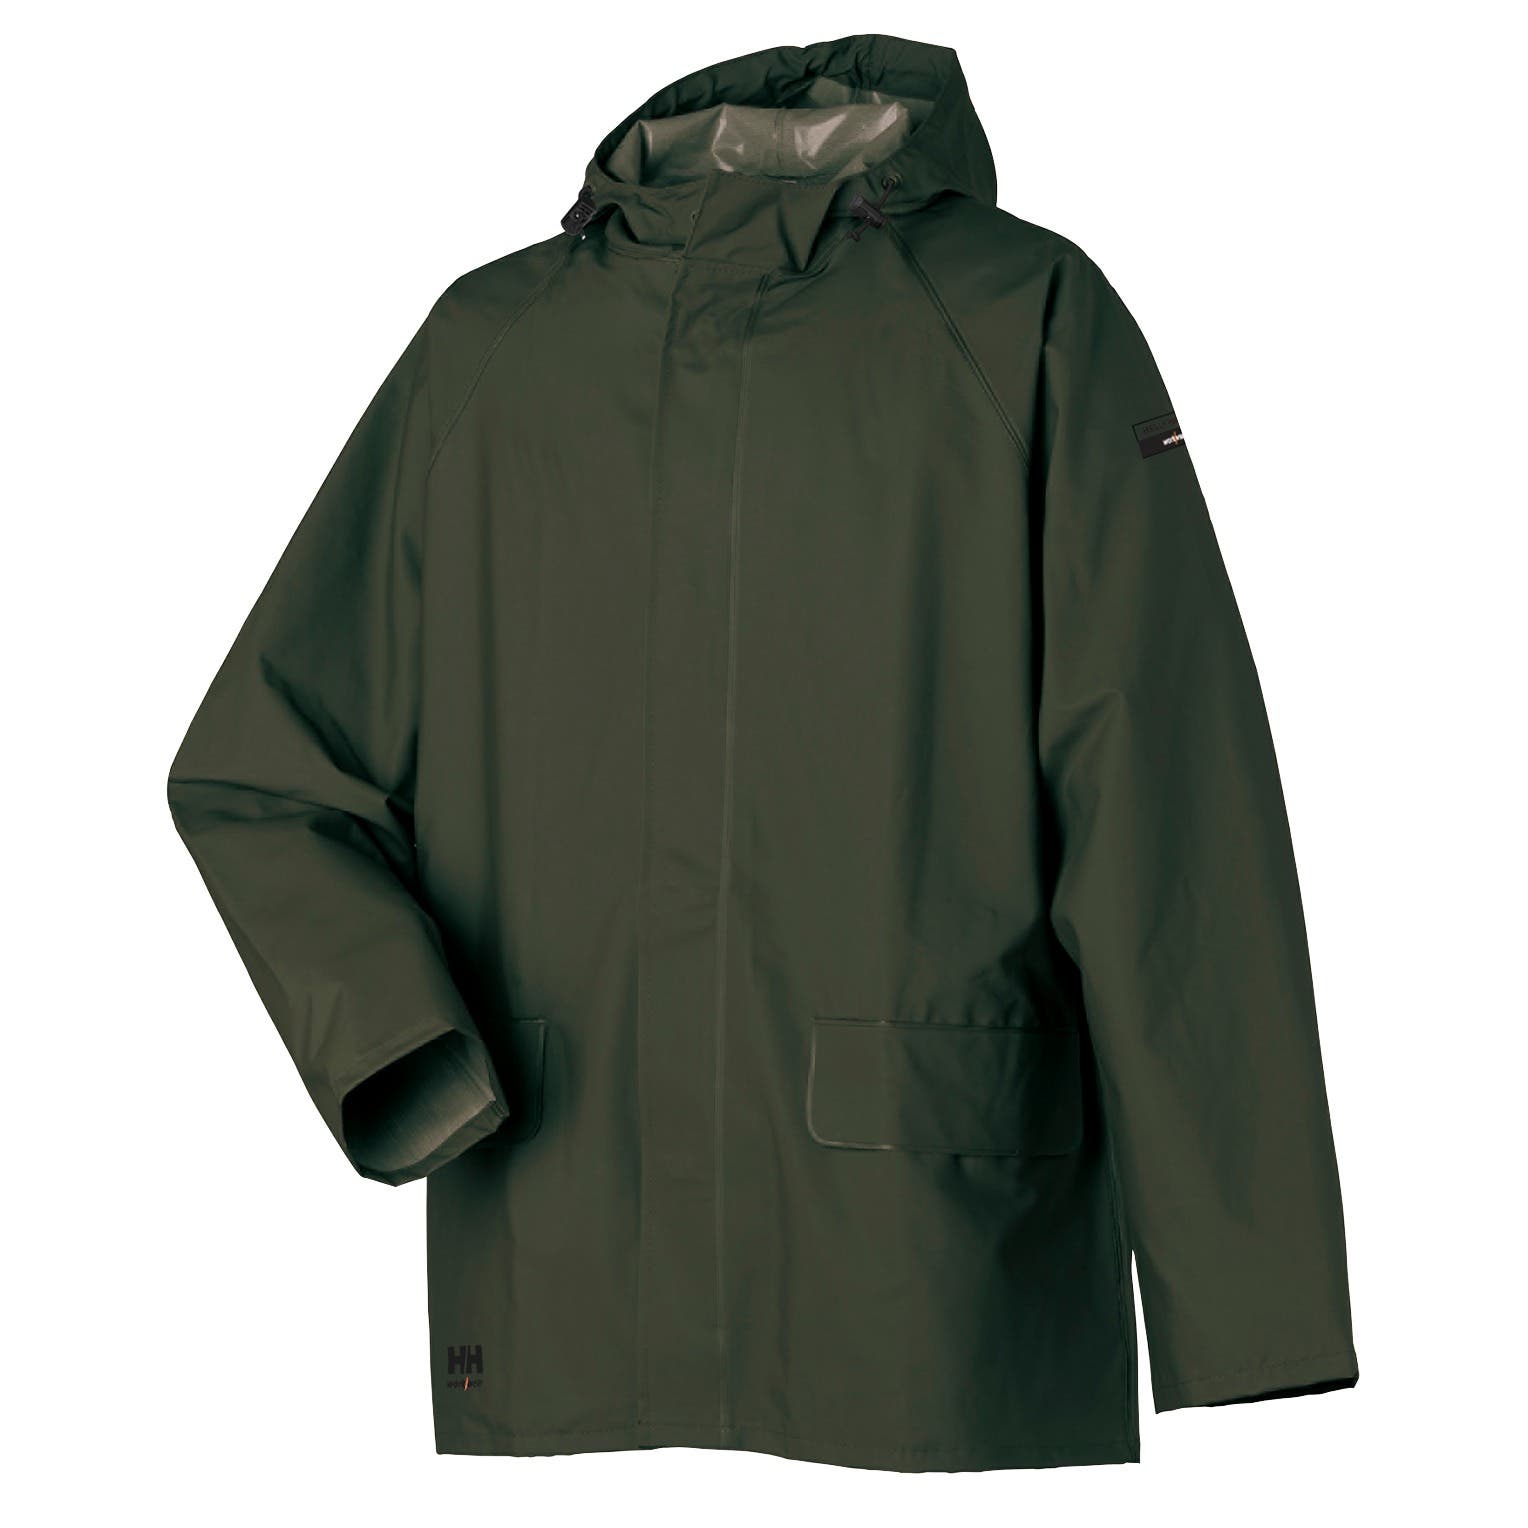 Helly Hansen Men's Mandal Rain Jacket in Army Green from the front